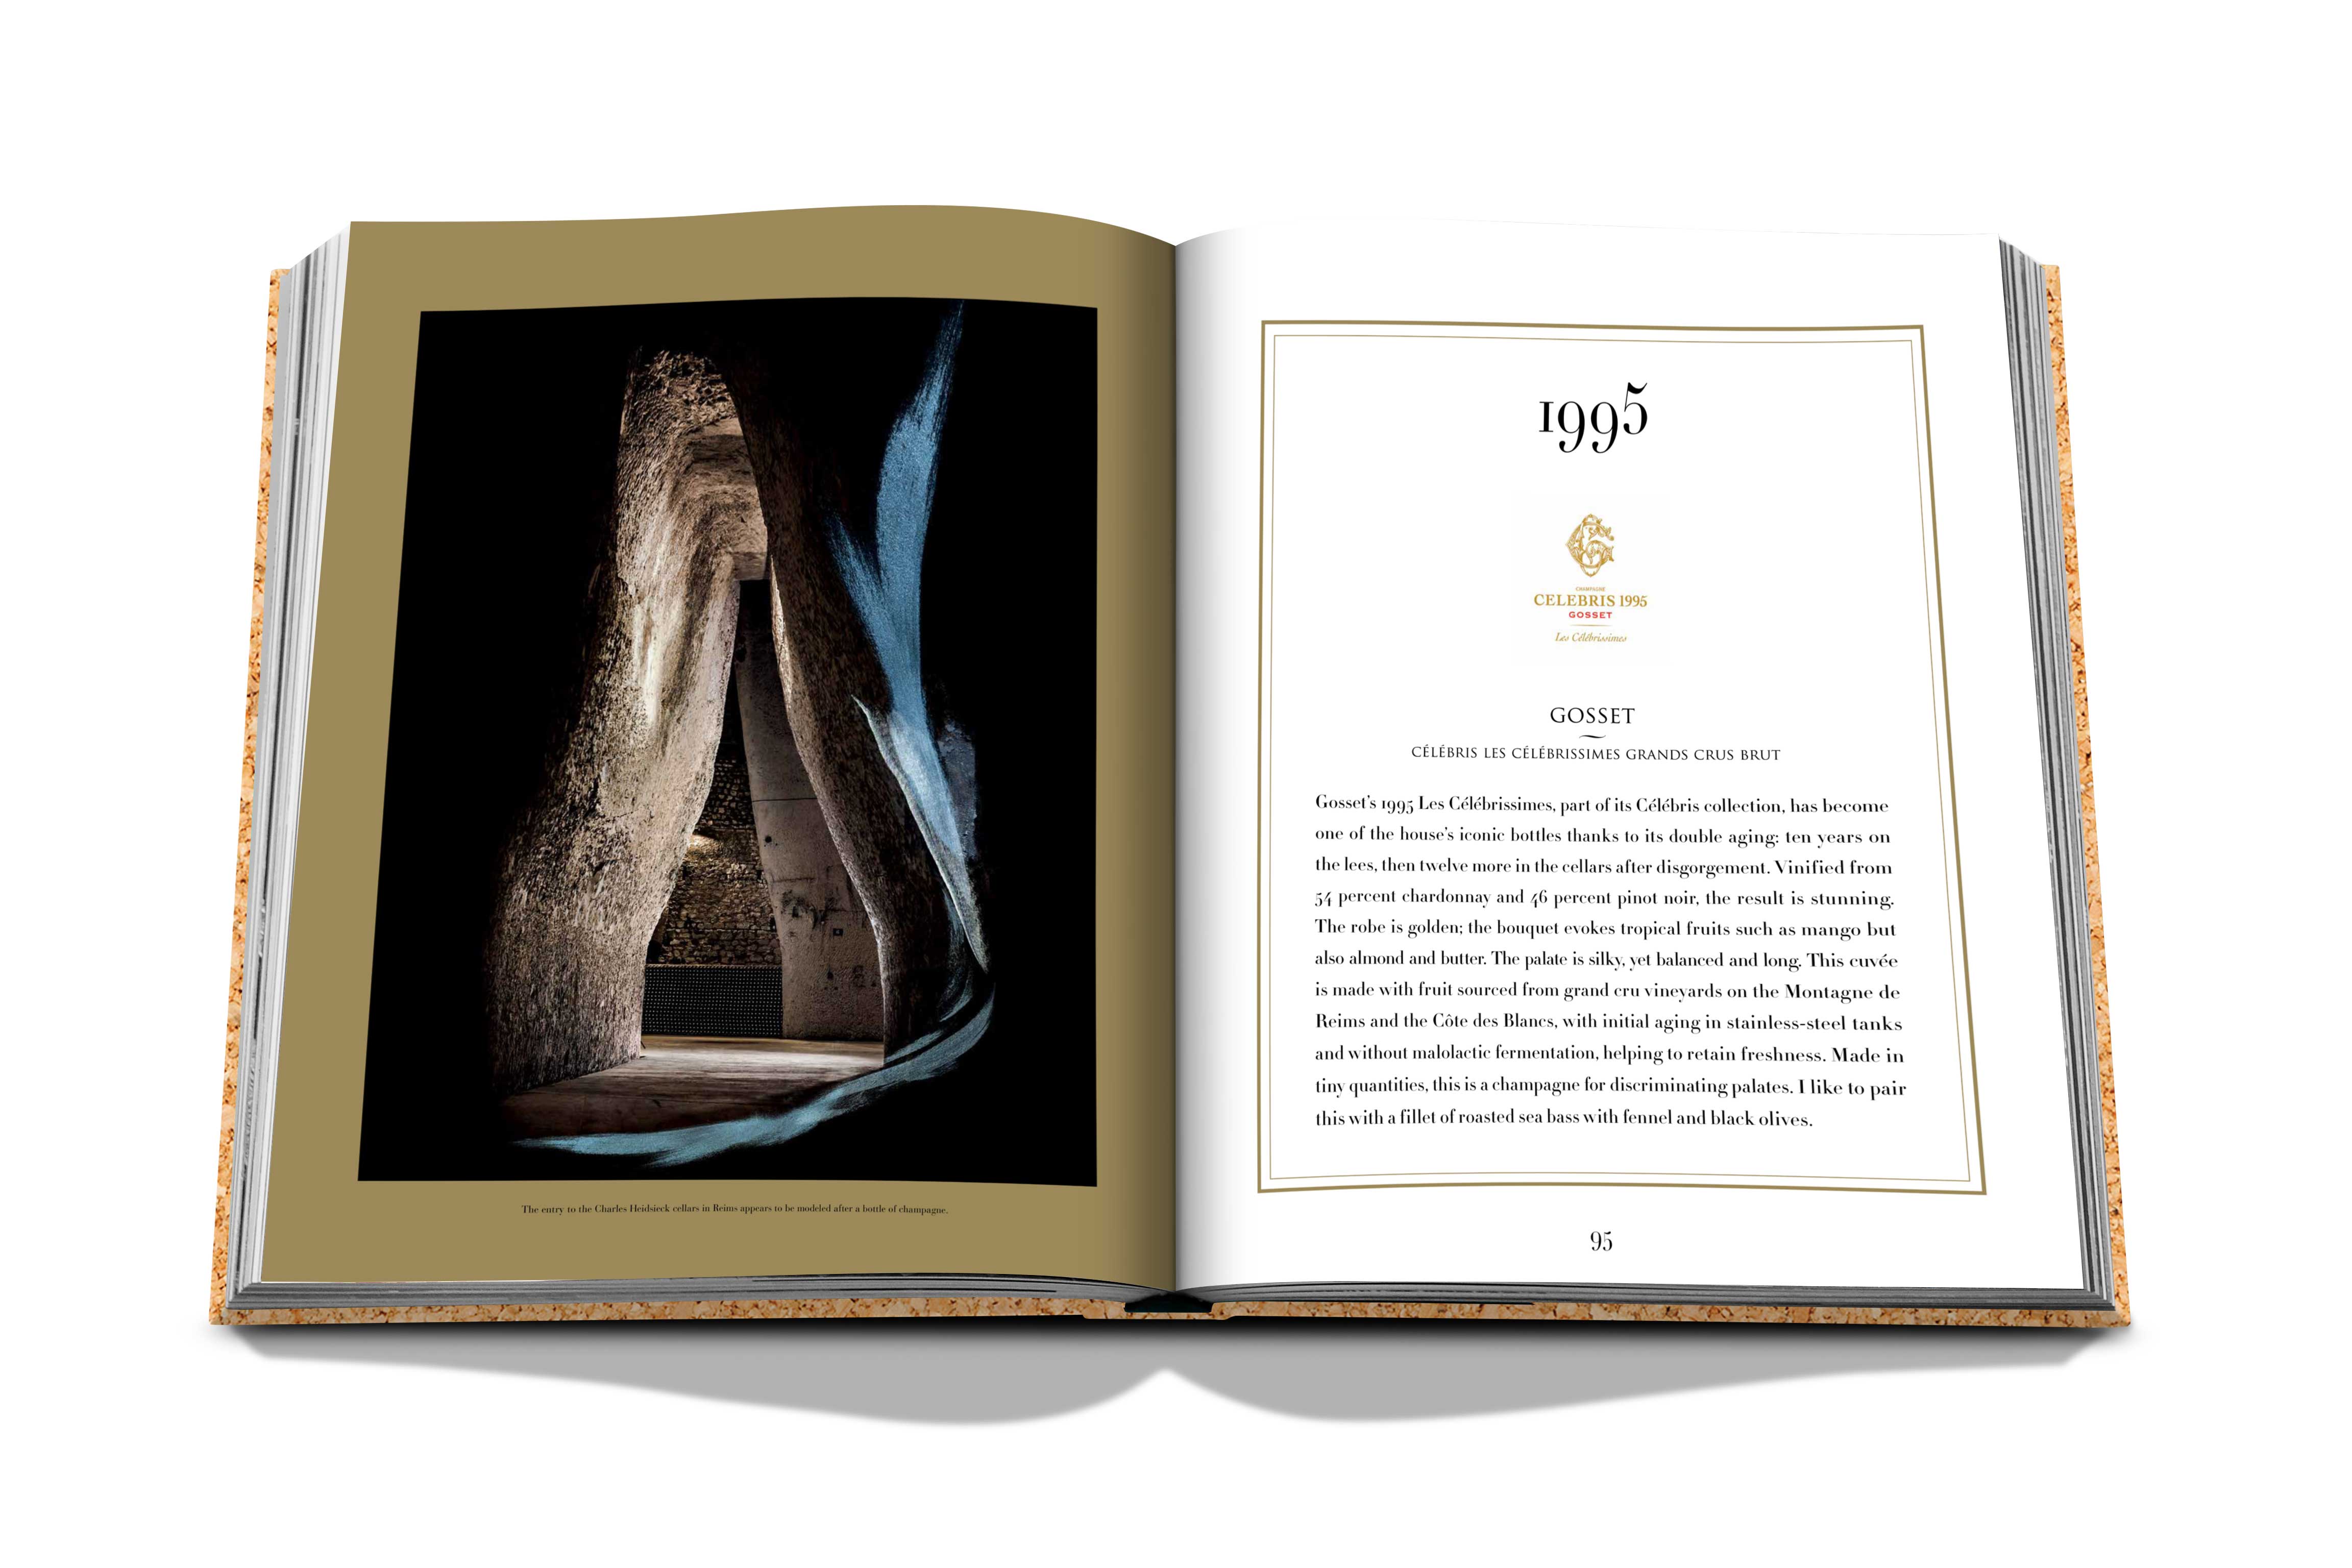 Assouline The Impossible Collection of Champagne